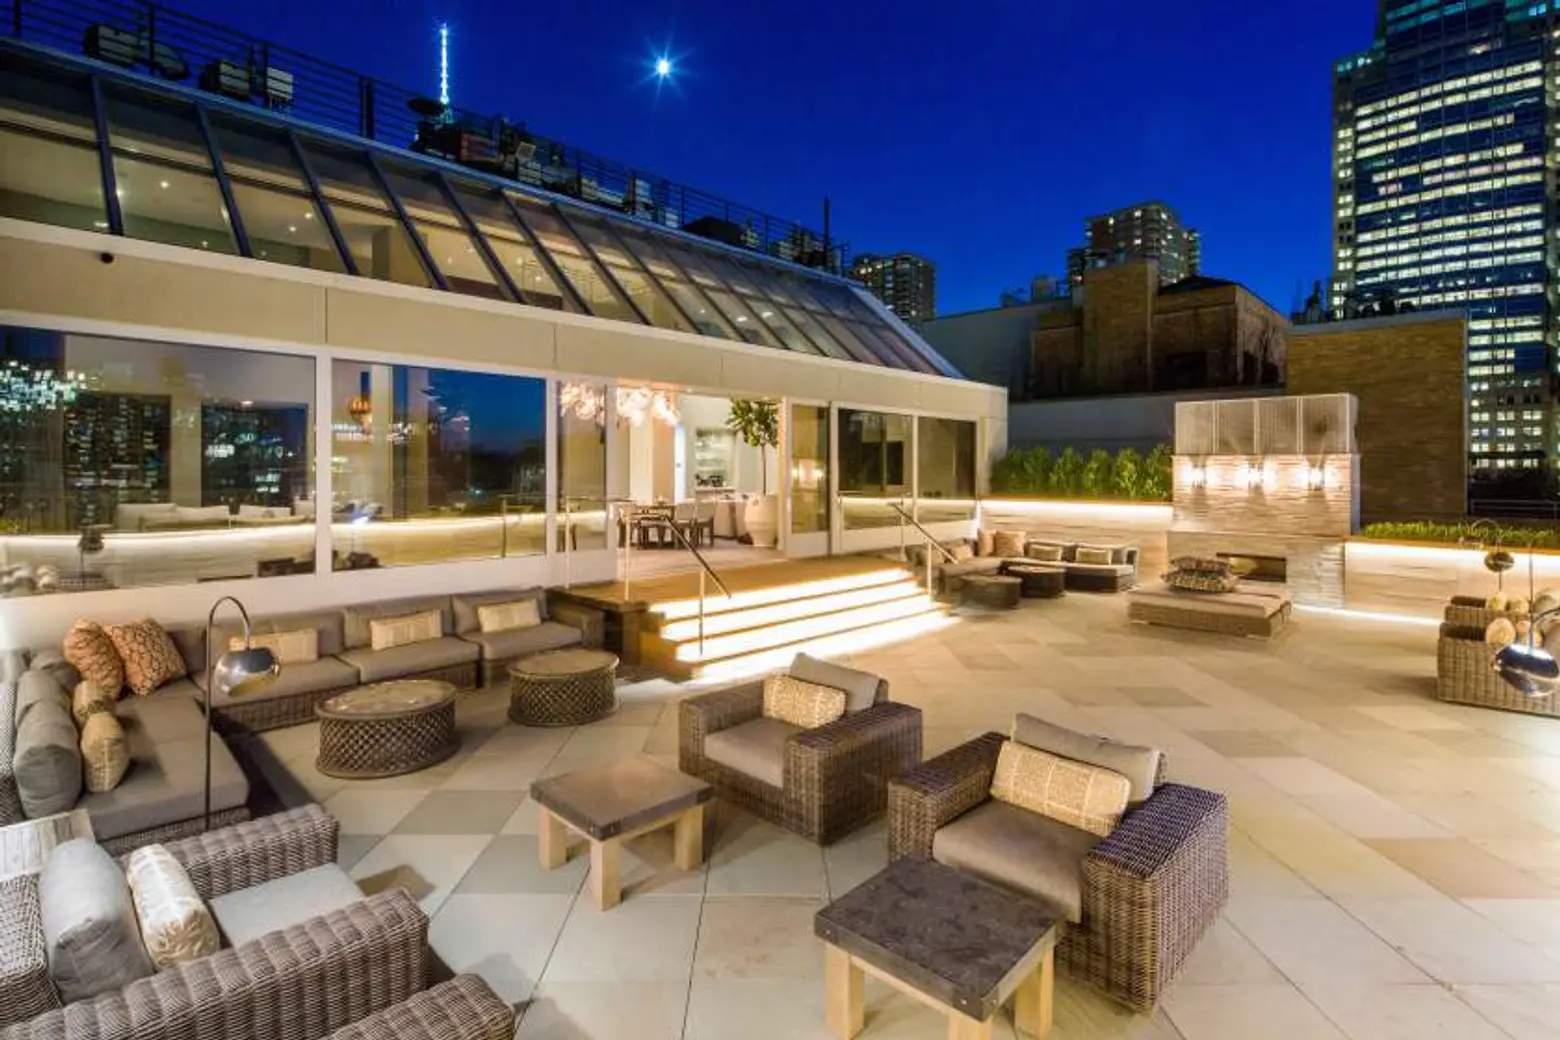 35 North Moore Street, Deron Williams, NYC celebrity real estate, Tribeca penthouse, homes of NBA players